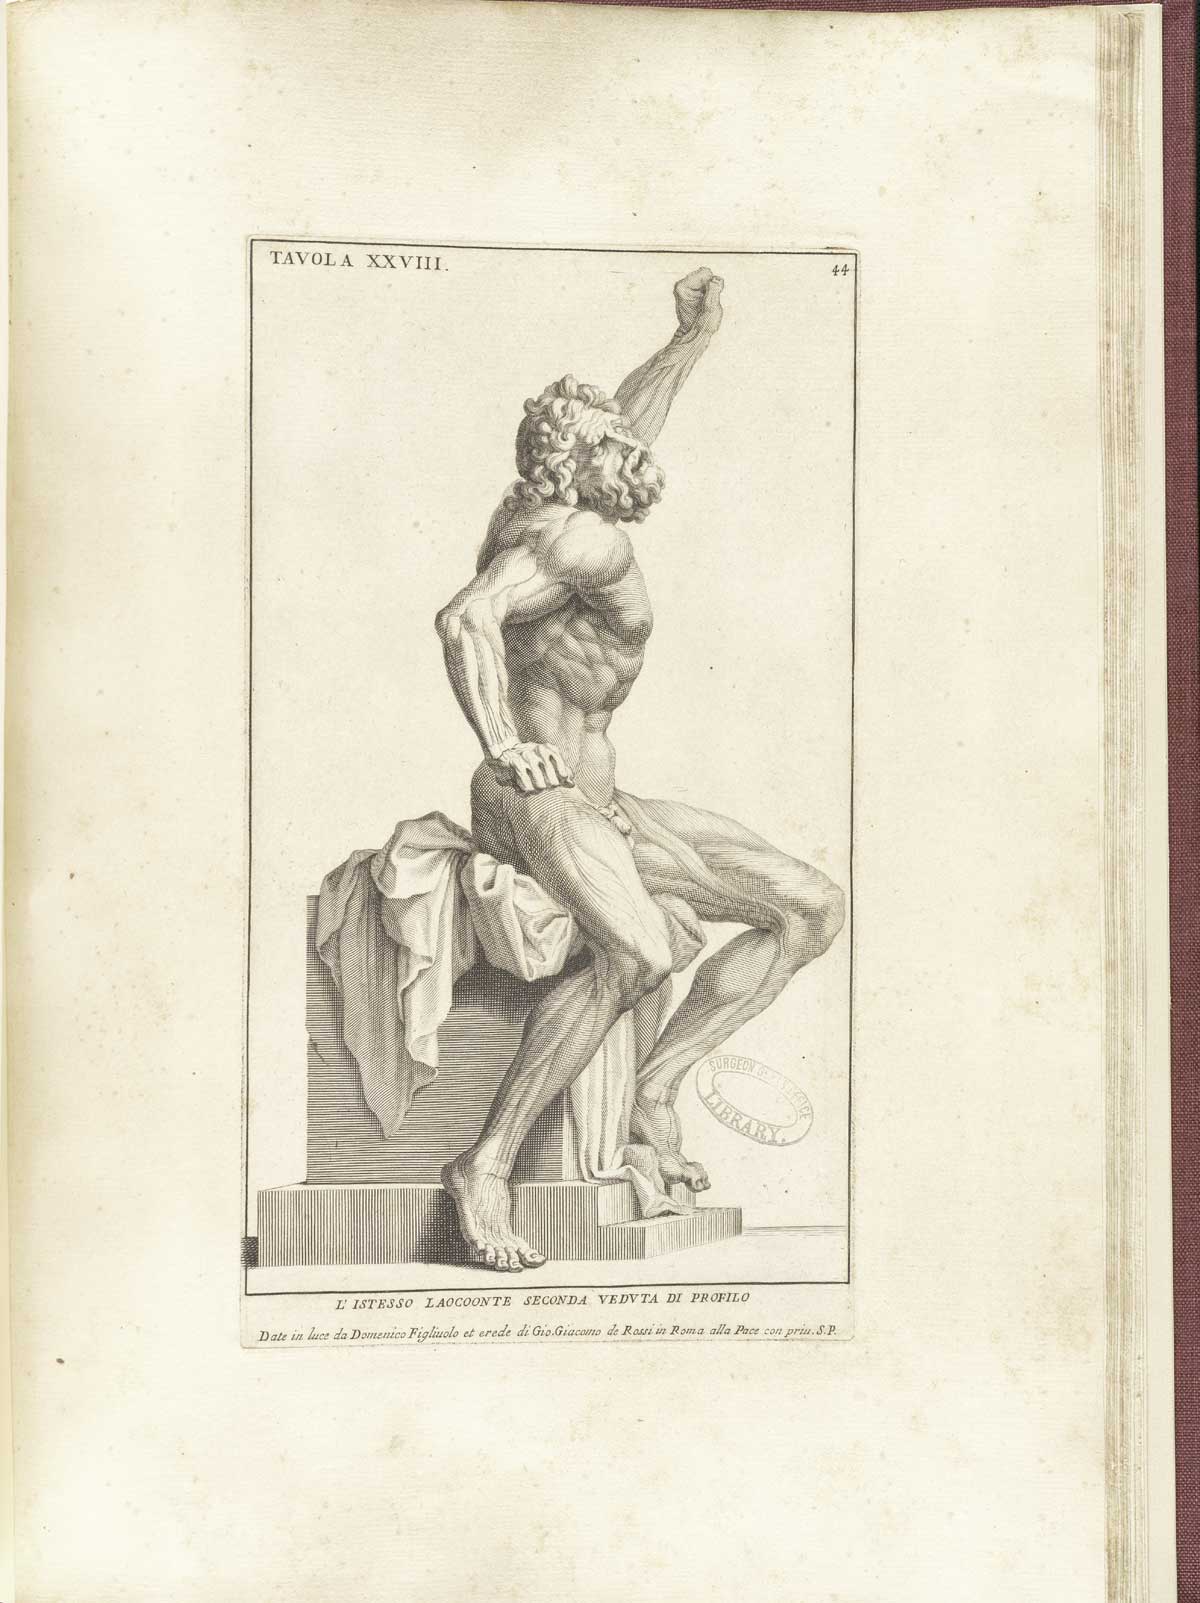 Engraving of the statue of Laocoon without his sons or the large snake which ate them; the nude seated figure is viewed from his right side and has his left arm raised in struggle clenched in a fist as his right arm pushes down at his side, also with a clenched fist; his face faces the viewer with a look of struggle and agony; from Bernardino Genga’s Anatomia per uso et intelligenza del disegno, NLM Call no.: WZ 250 G329an 1691.